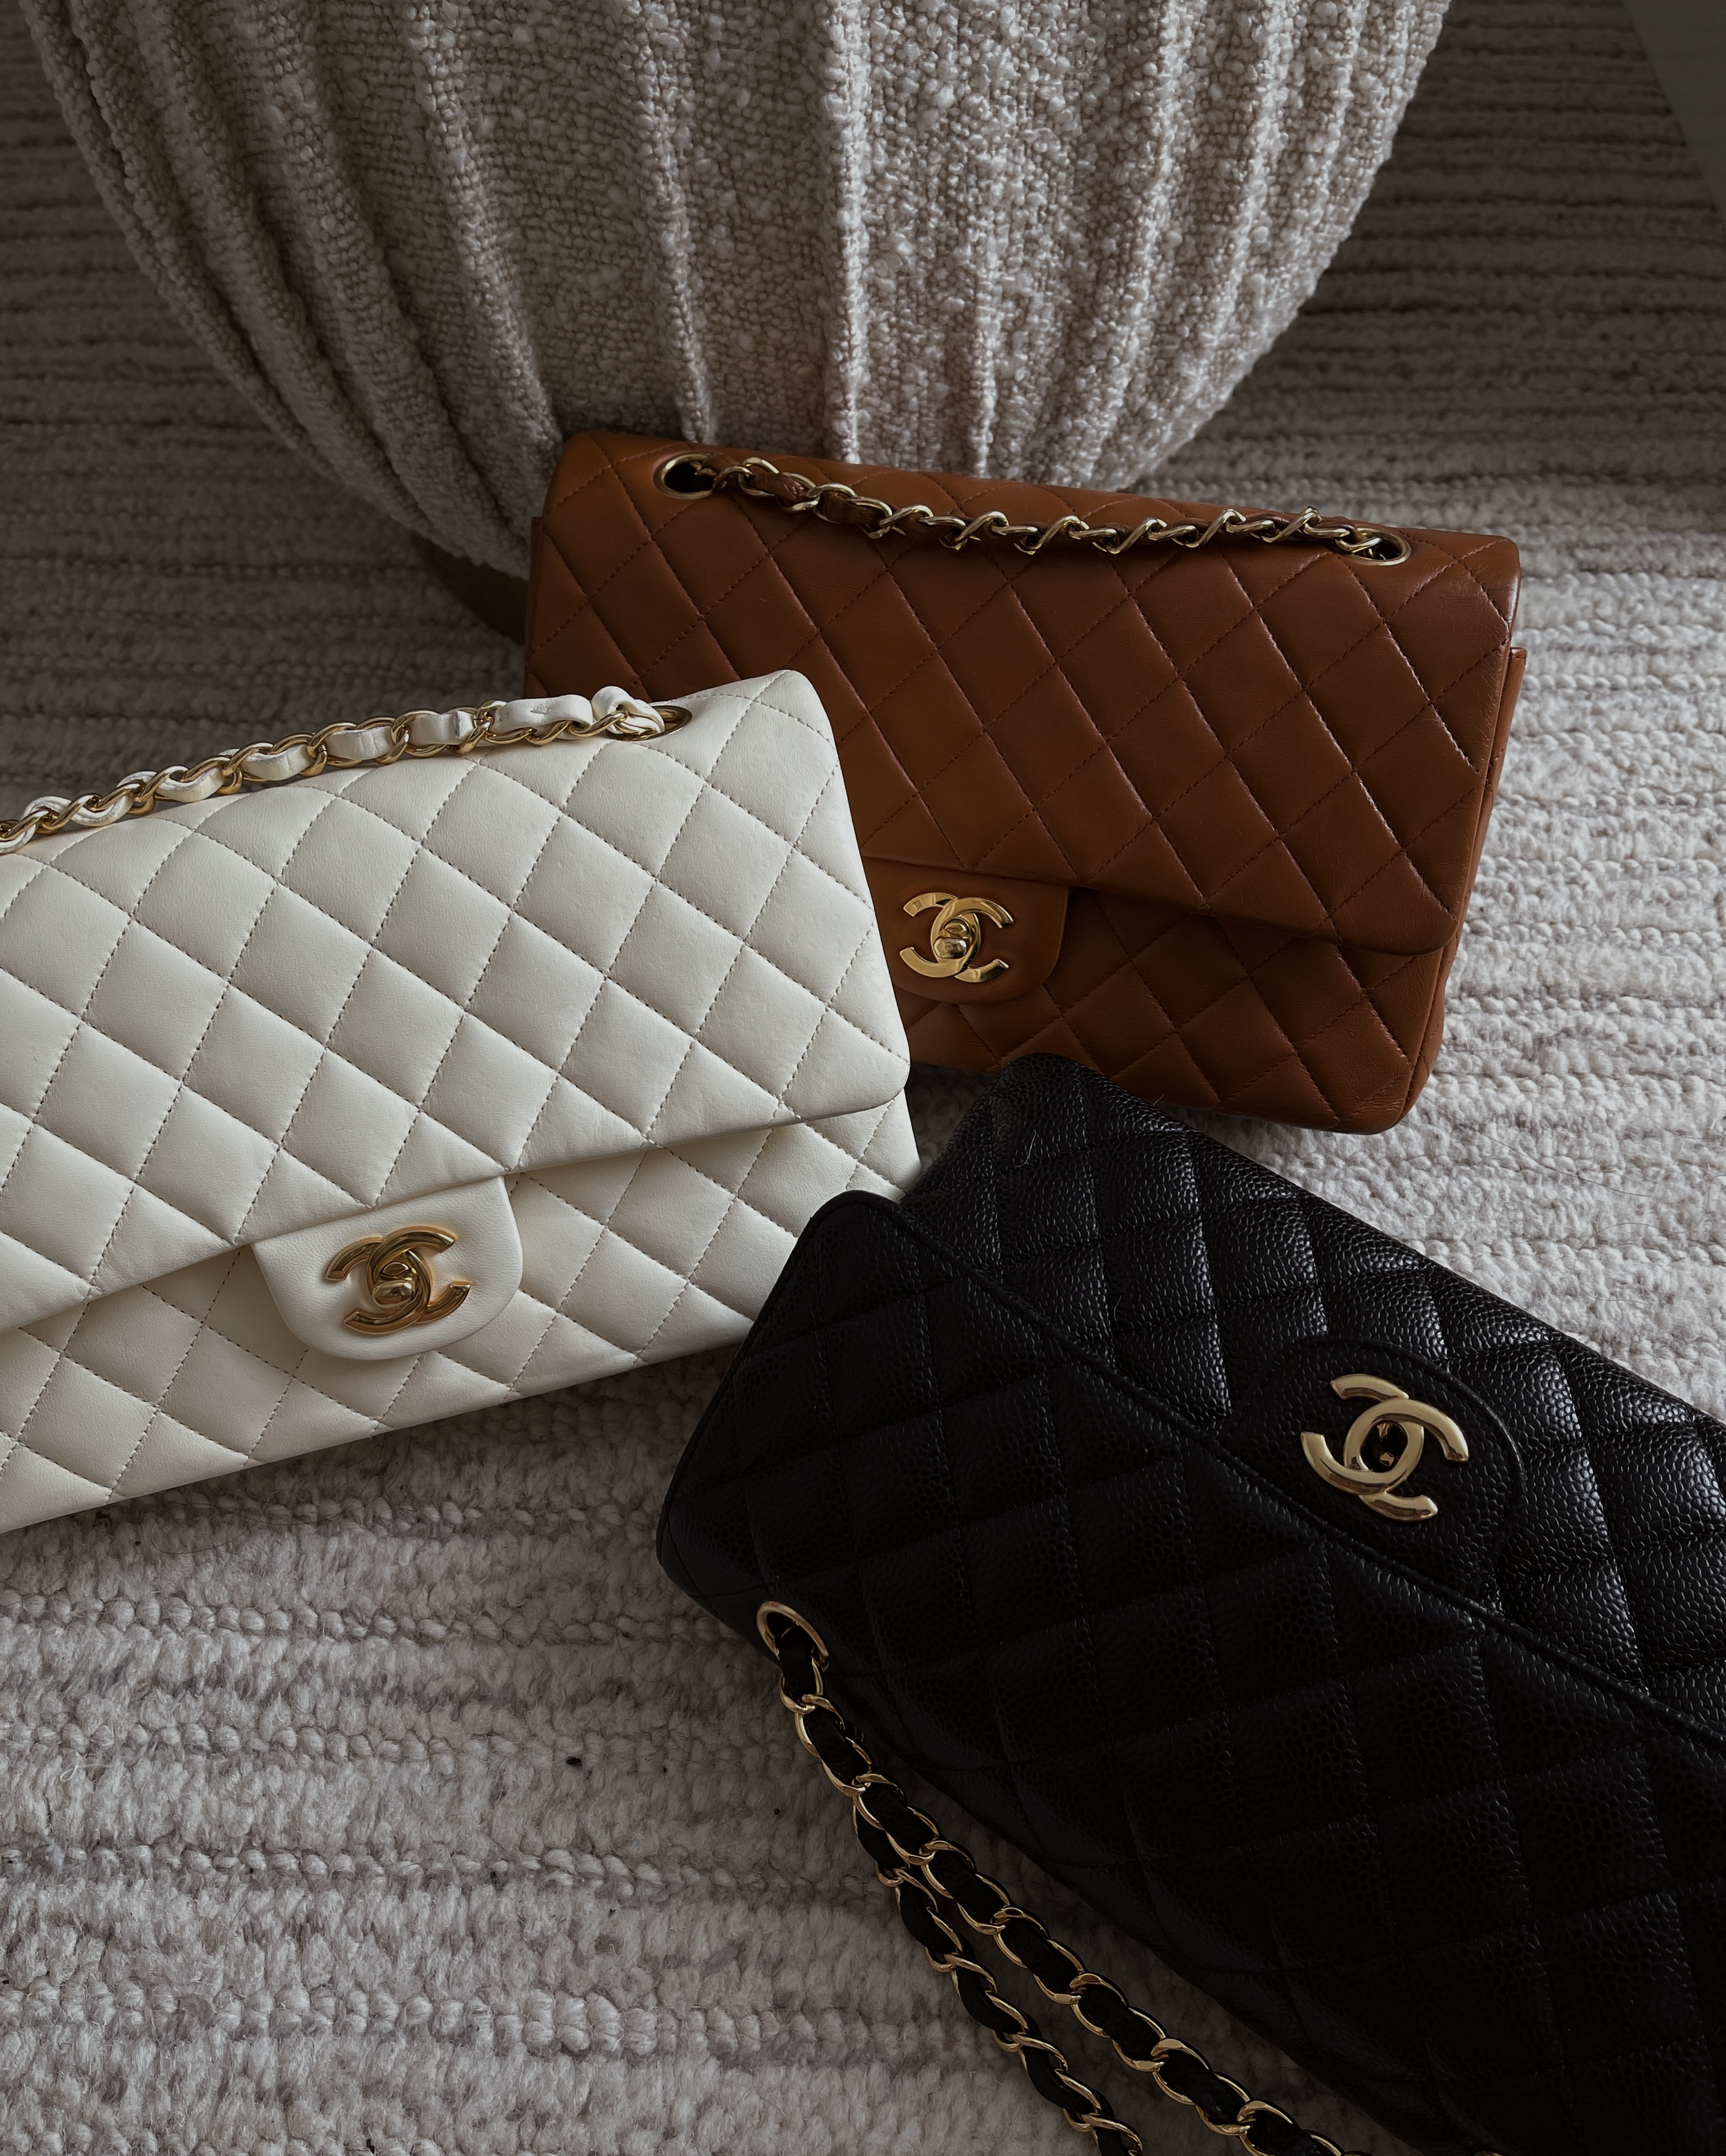 Chanel Gabrielle Bag Price Increases